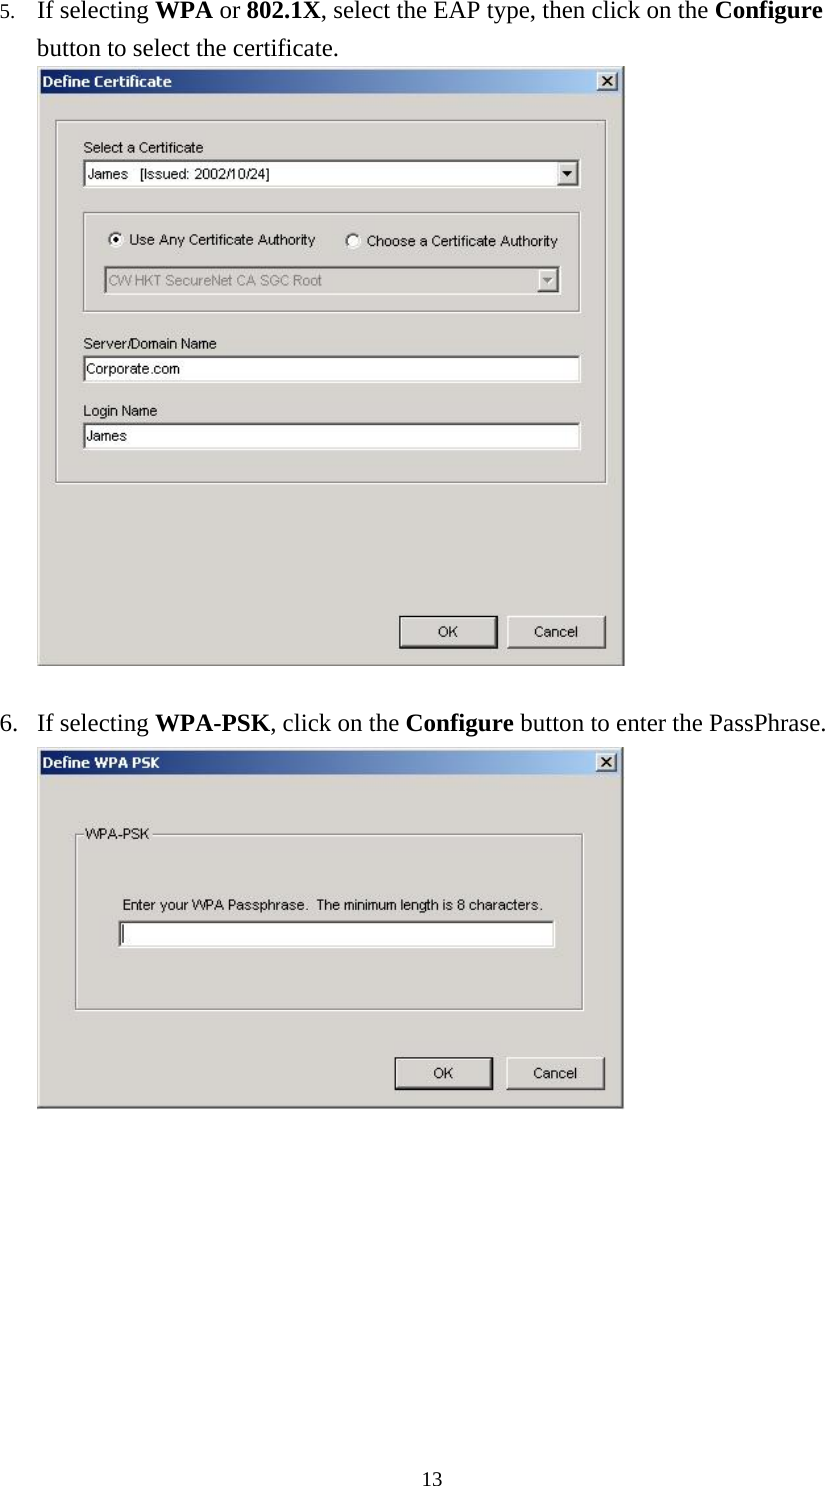  135. If selecting WPA or 802.1X, select the EAP type, then click on the Configure button to select the certificate.   6. If selecting WPA-PSK, click on the Configure button to enter the PassPhrase.   